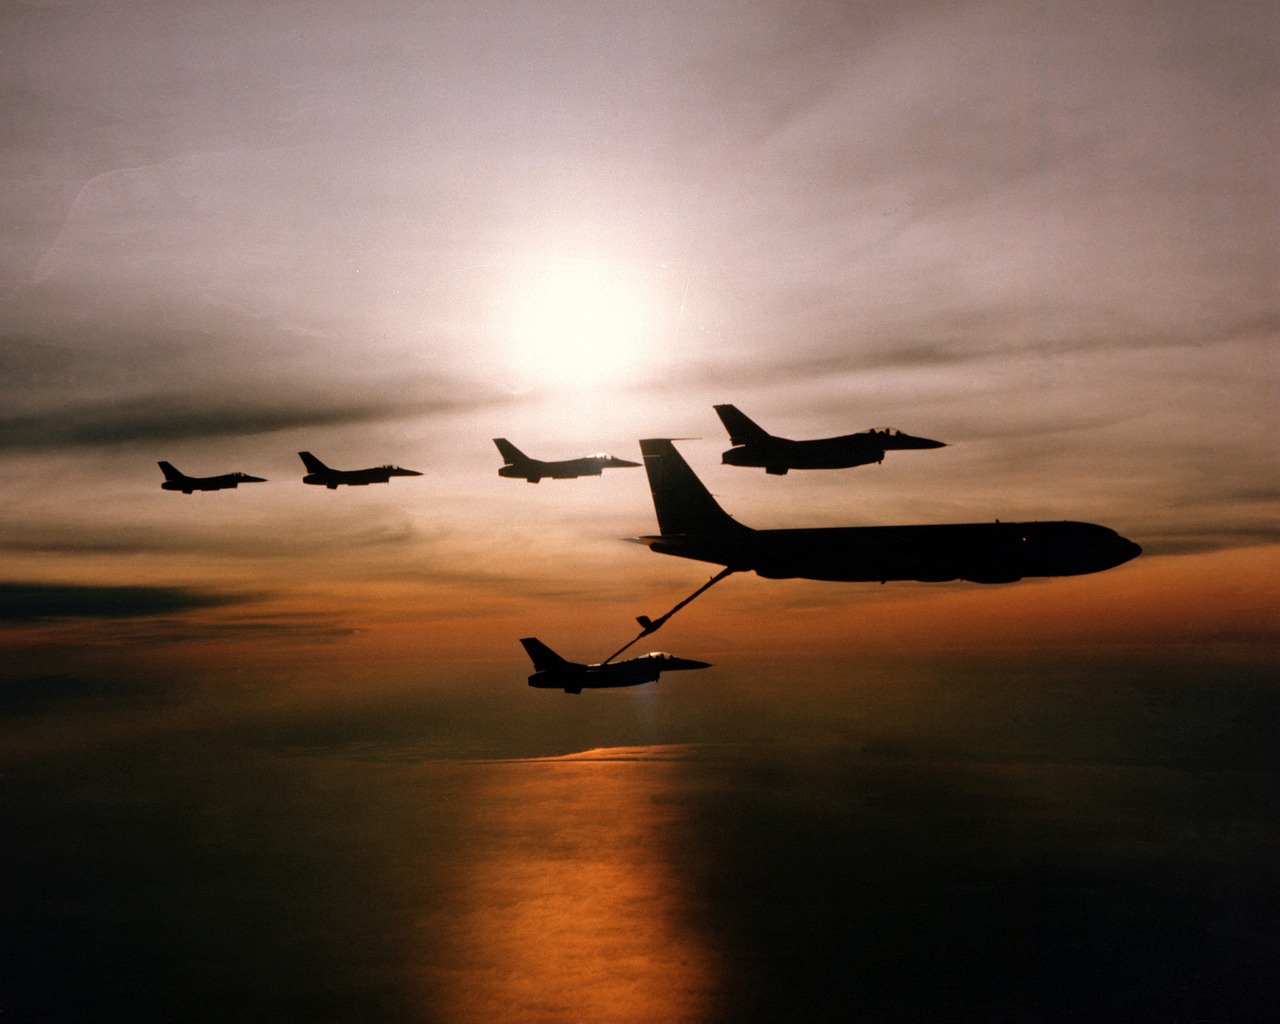 aircraft silhouettes backlight free photo